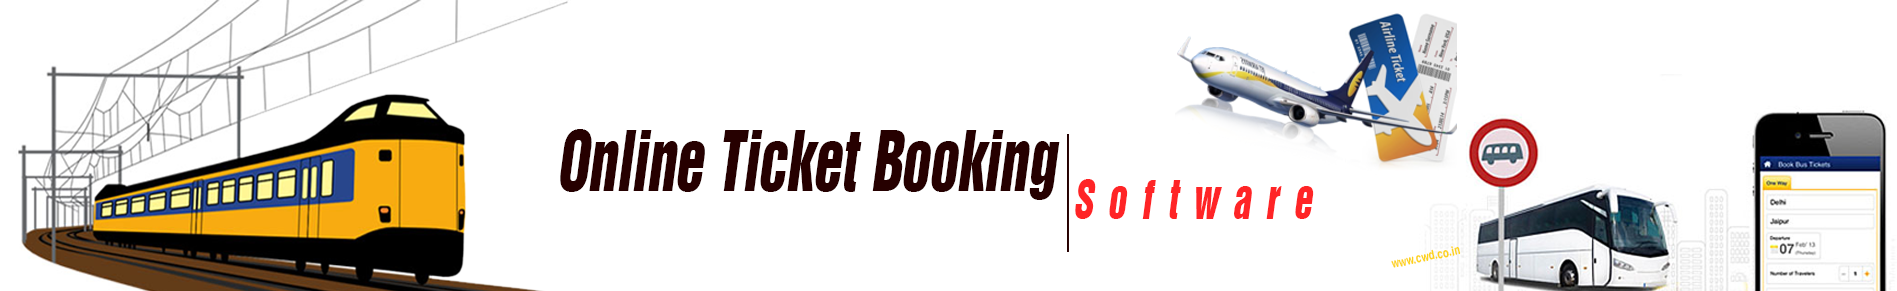 Online Ticket Booking Software in Chennai | Mobile Ticket Booking Software Development company in Chennai - cwd.co.in